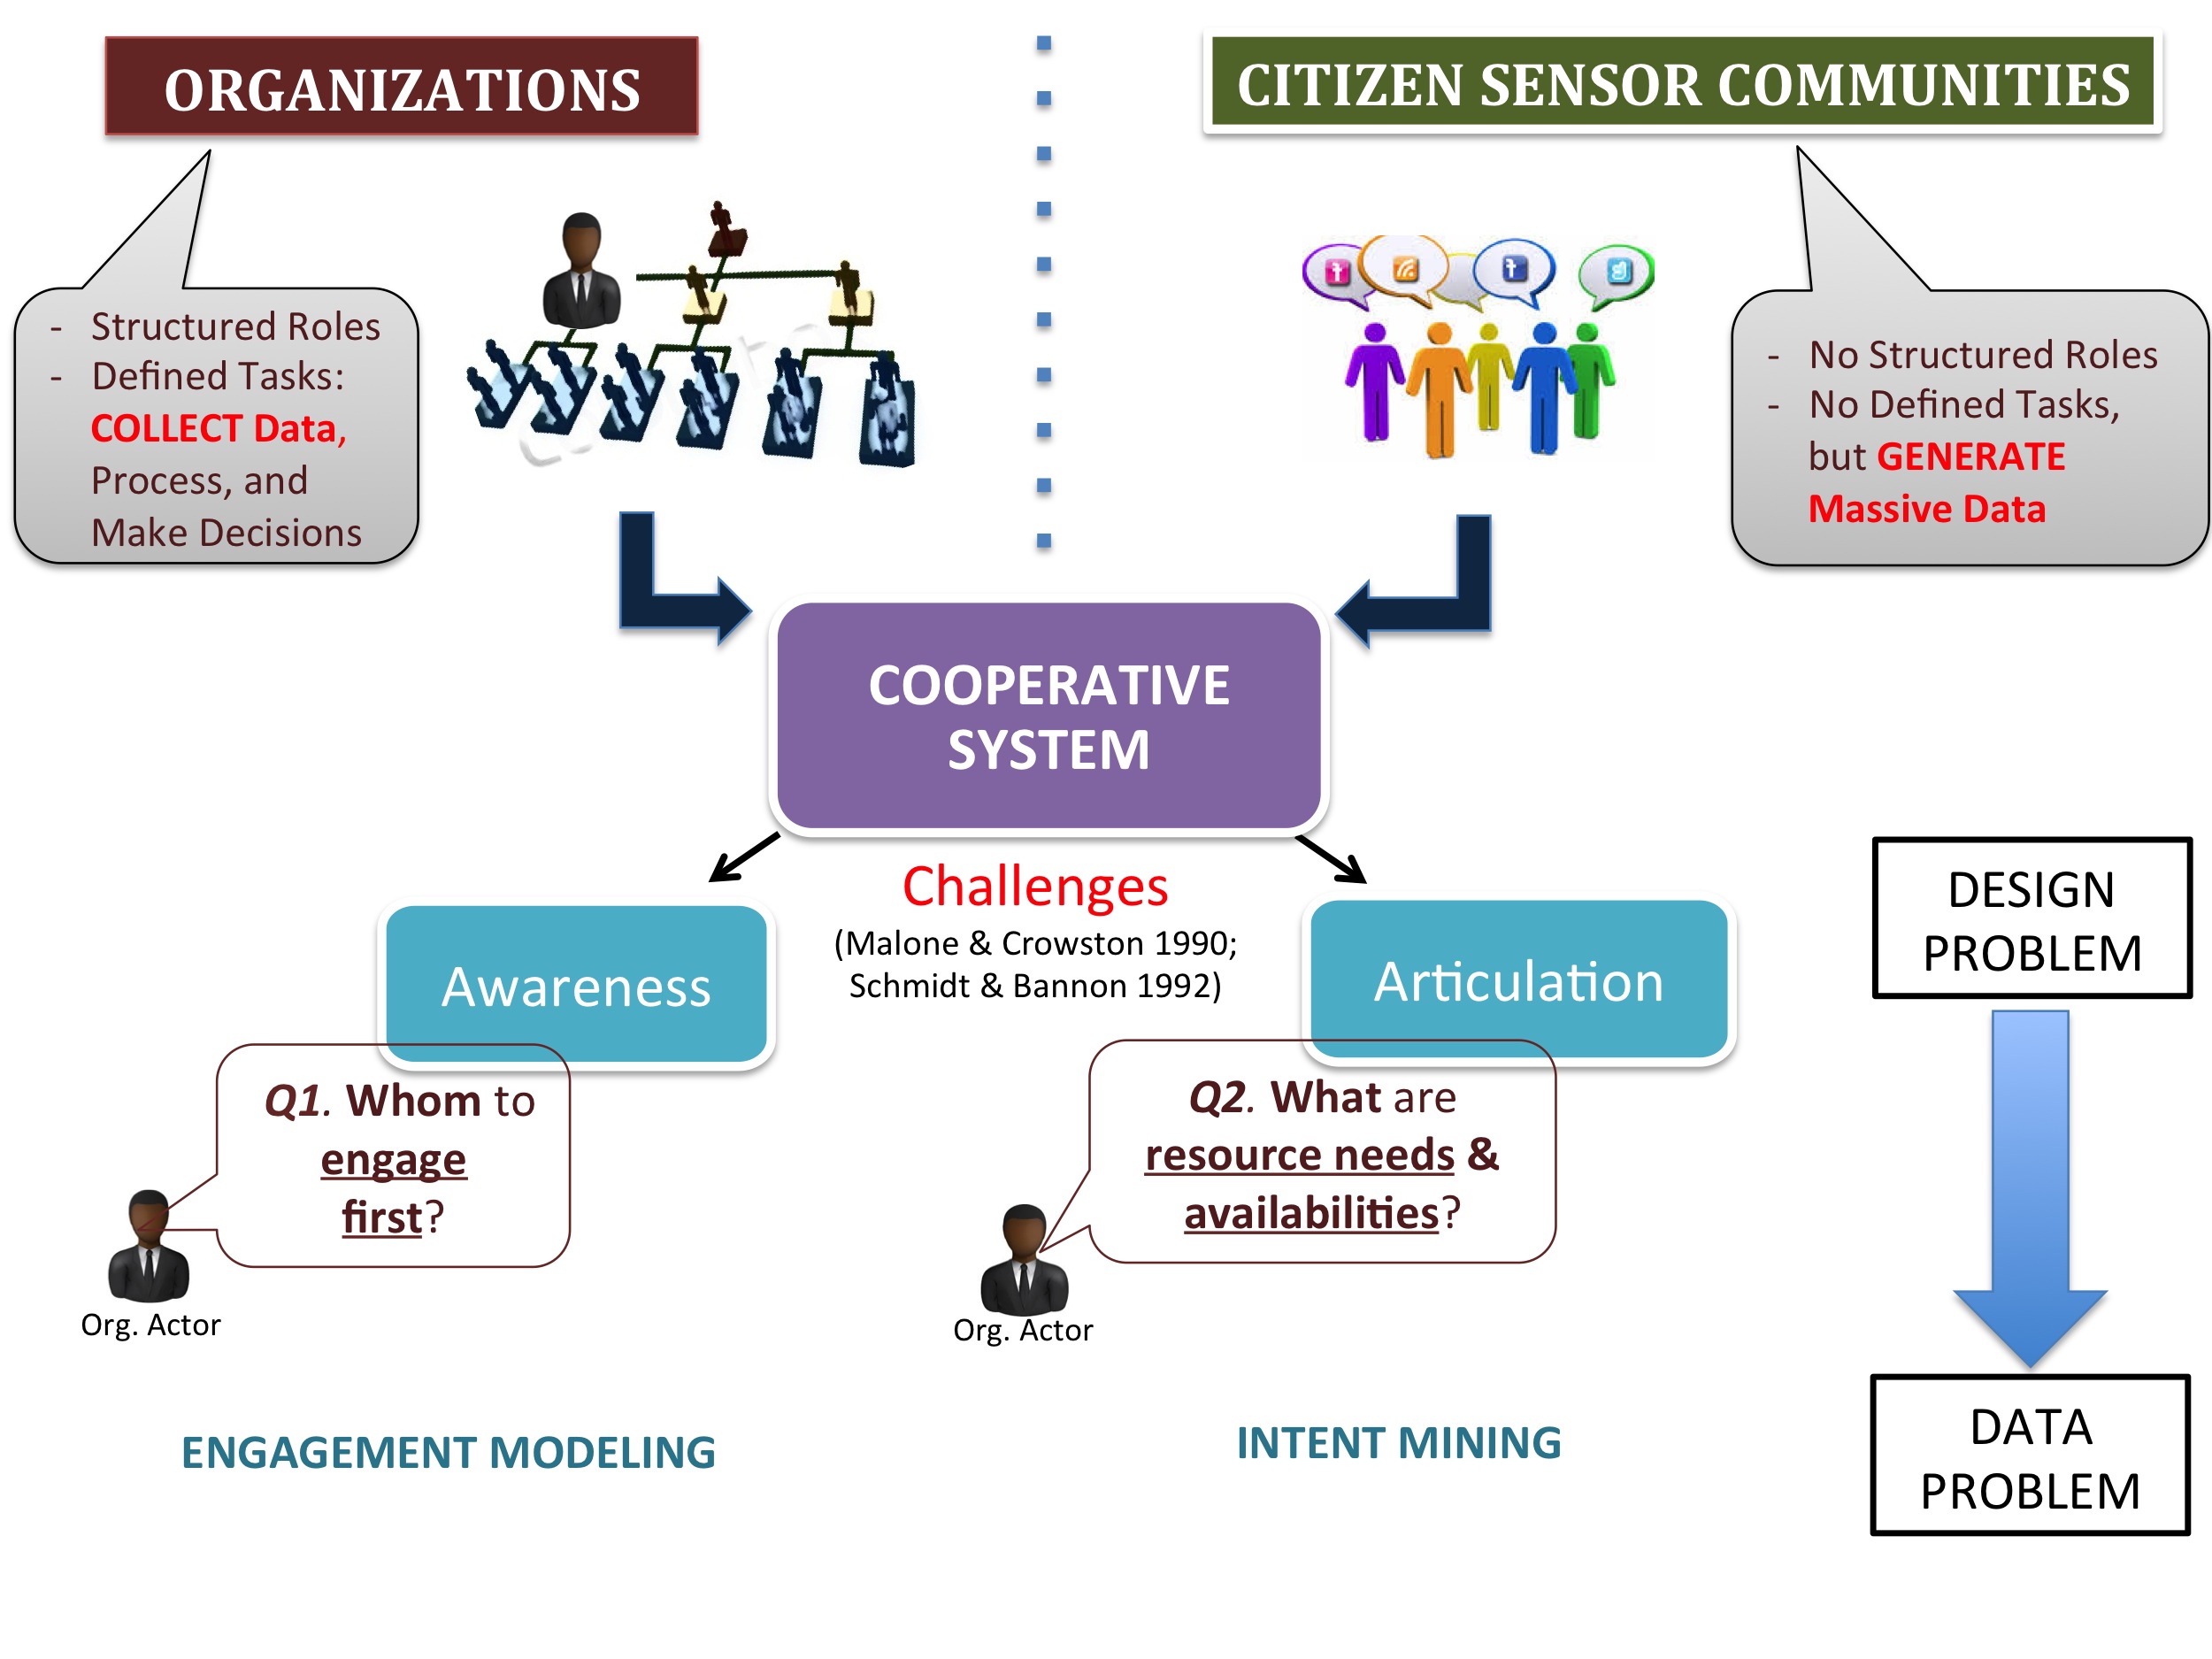 operationalize cooperative system design problems into data problems